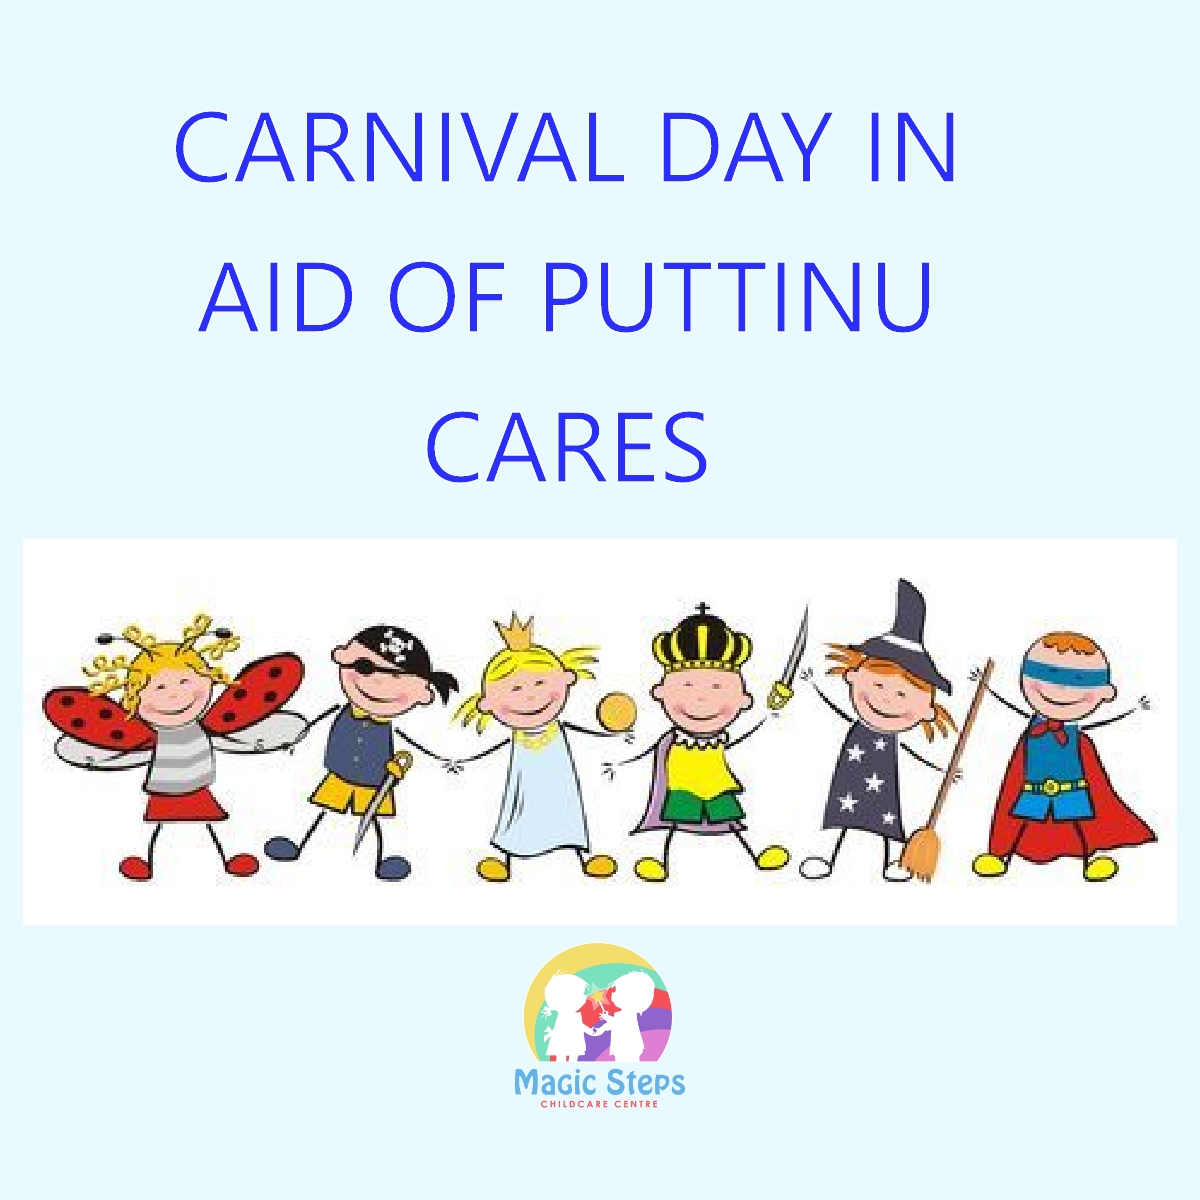 Carnival Day in Aid of Puttinu Cares- Friday 25th February